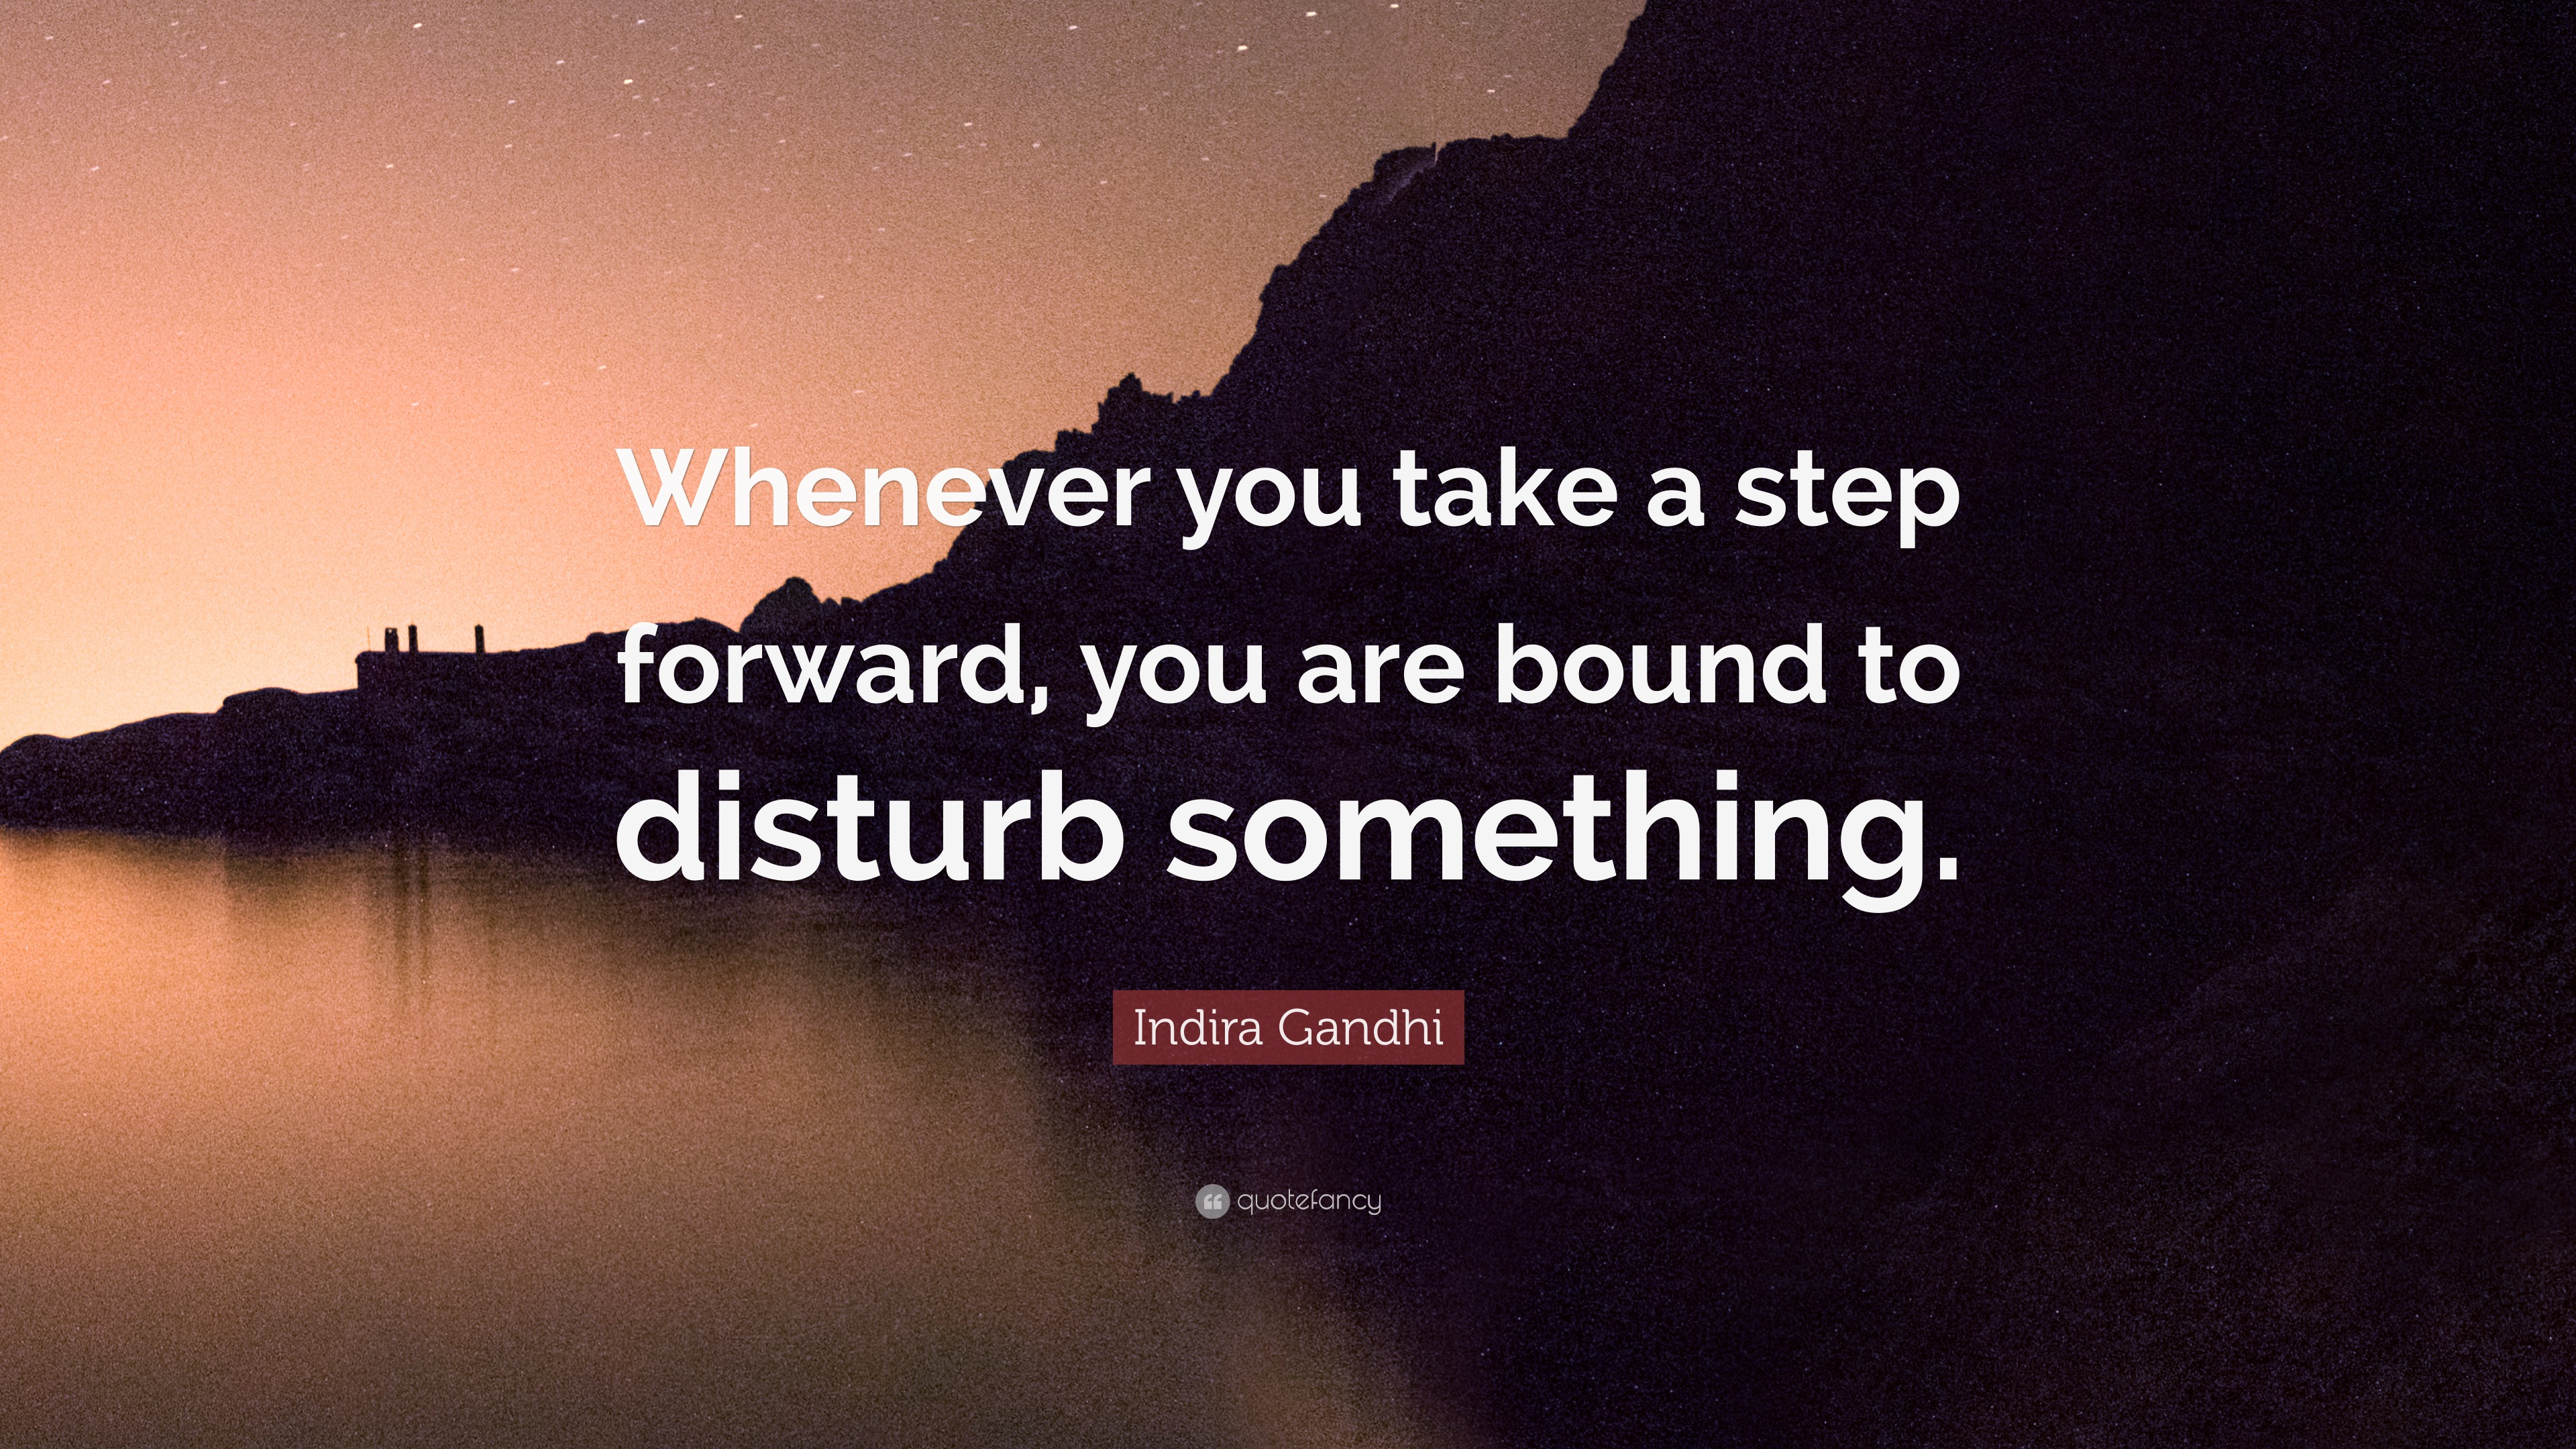 Indira Gandhi Quote: “Whenever you take a step forward, you are bound ...